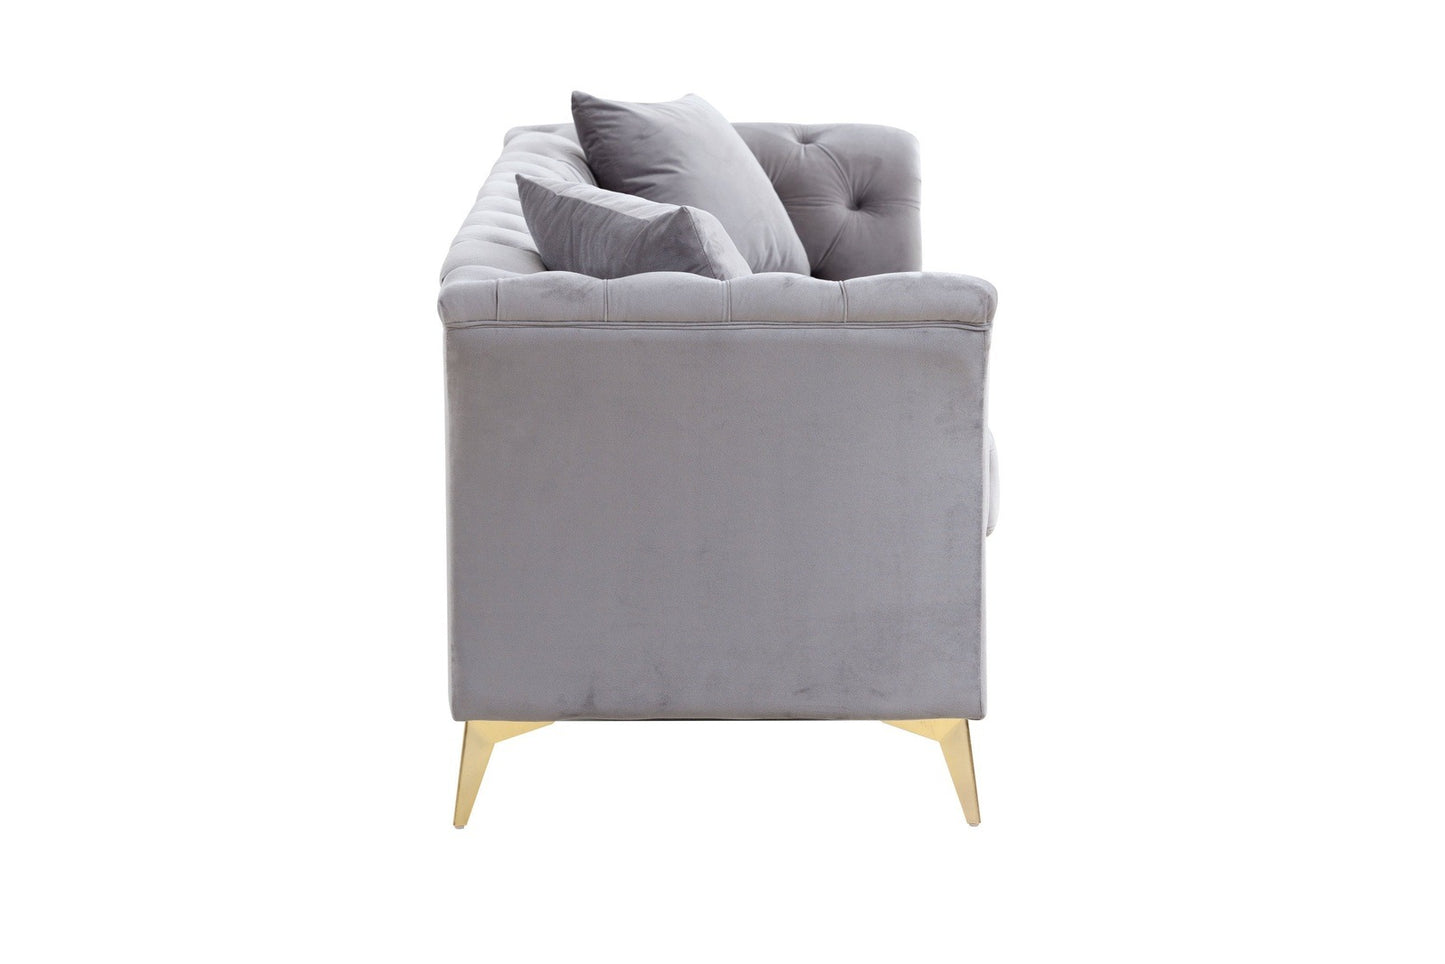 Modern Chesterfield Curved Sofa Tufted Velvet Couch 3 Seat Button Tufed Couch with Scroll Arms and Gold Metal Legs Grey